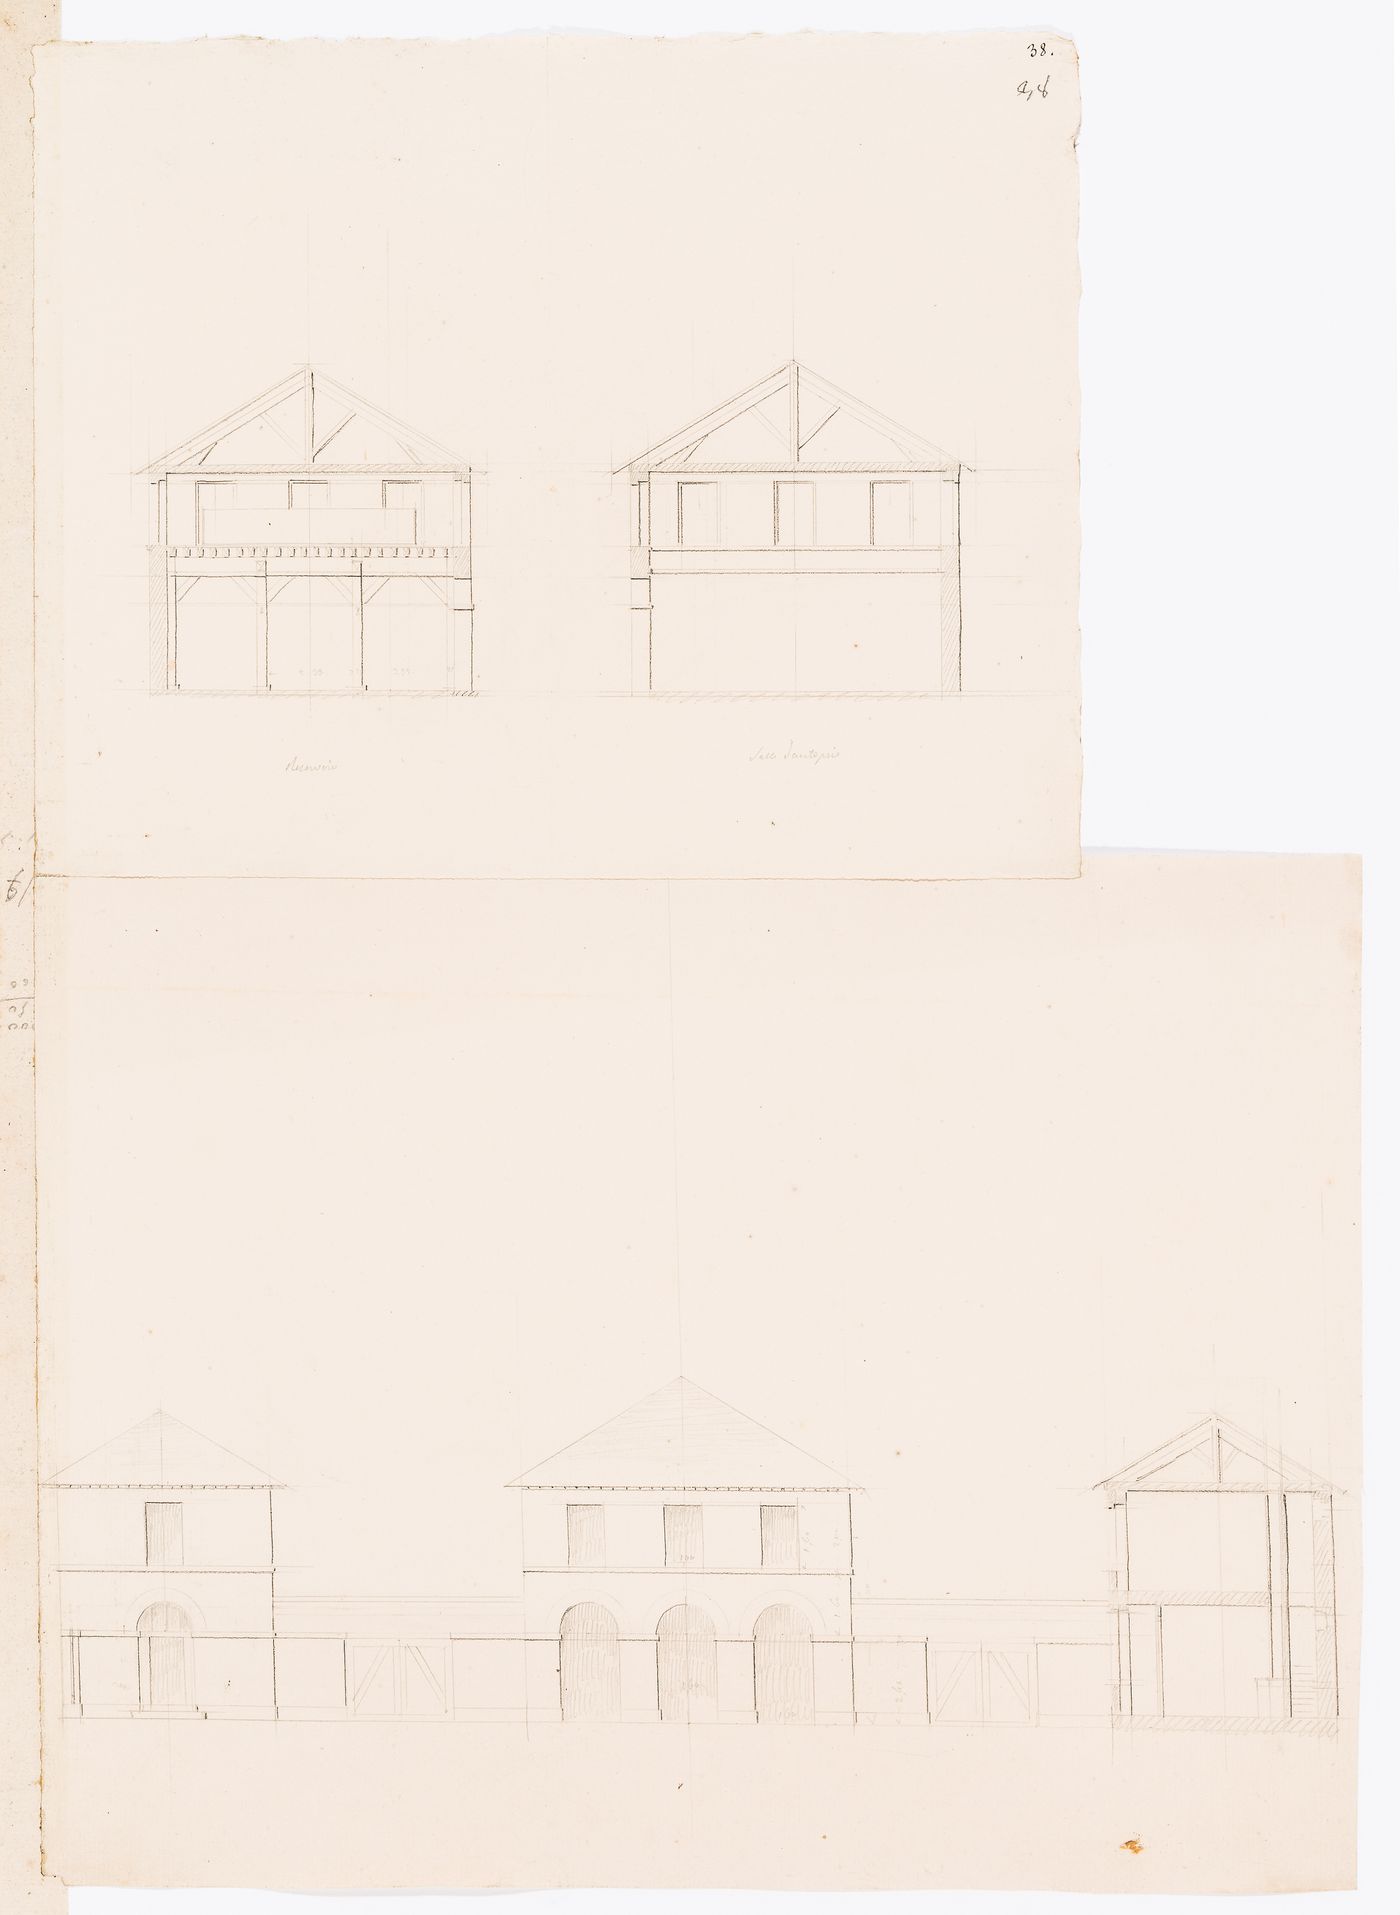 Project for a horse slaughterhouse, Plaine de Grenelle: Cross sections for an unidentified building and a reservoir building